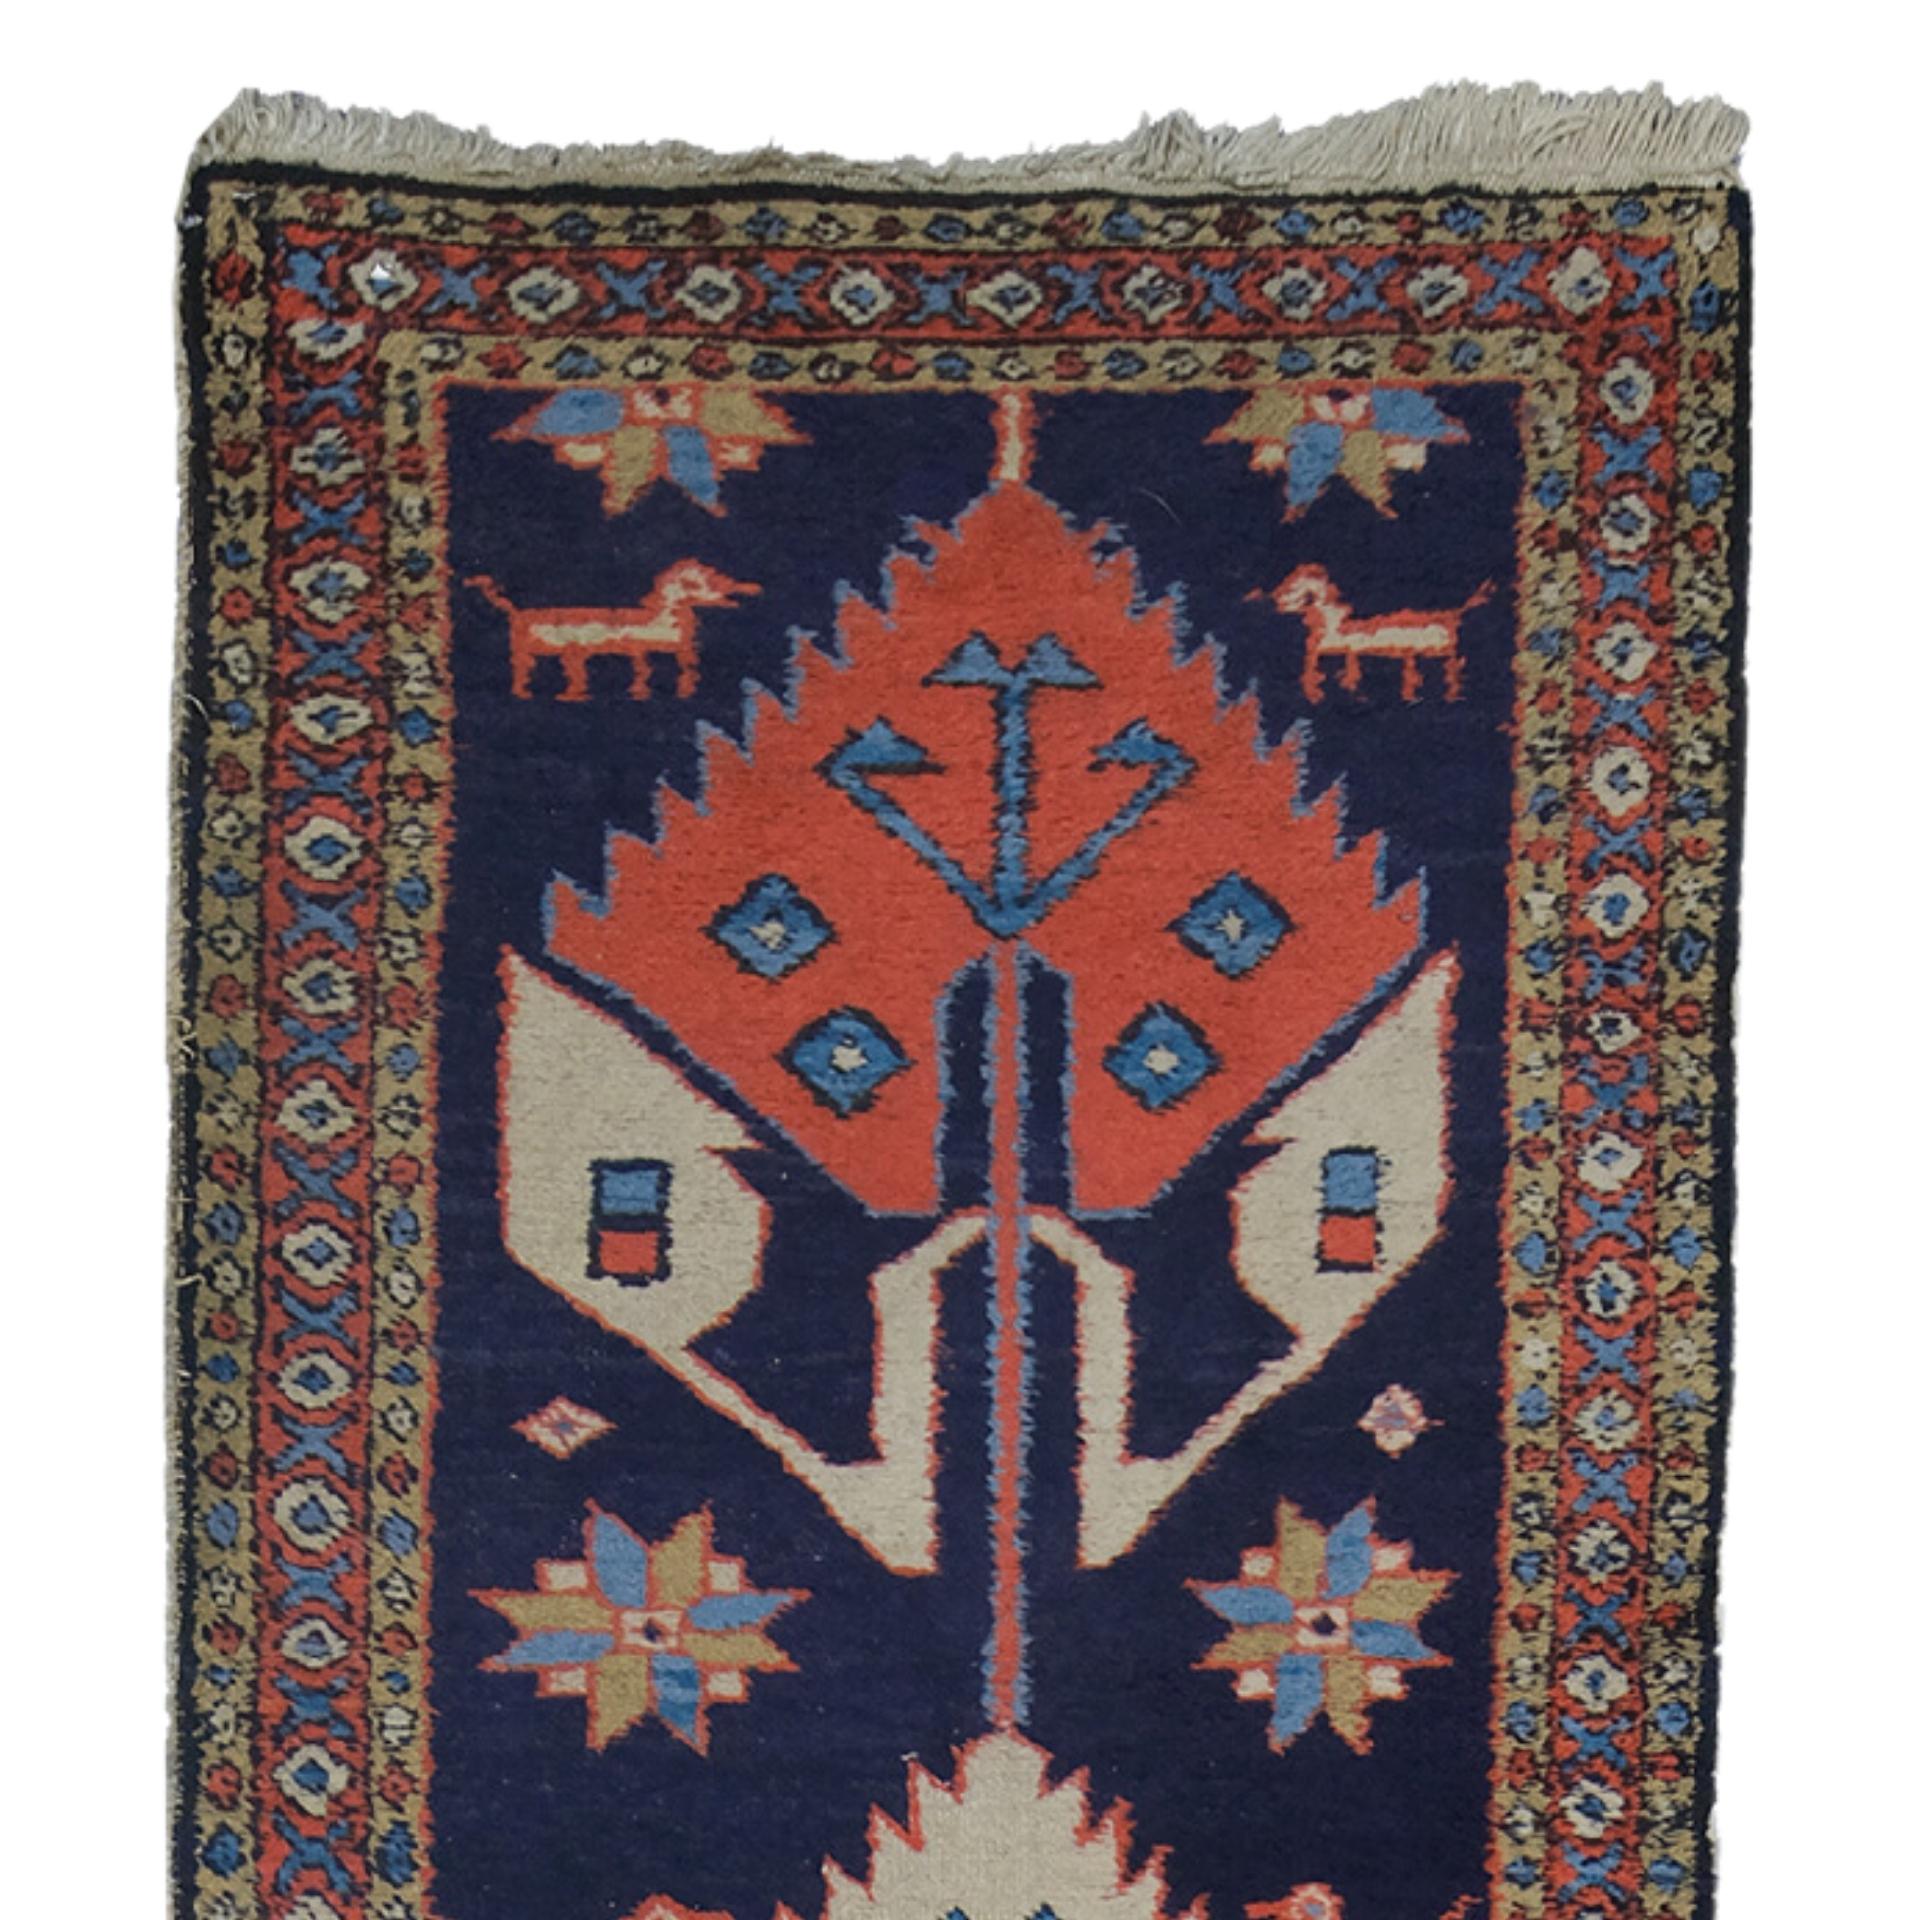 Antique Heriz Runner - Late of 19th Century Heriz Runner

This antique Heriz runner is a magnificent piece of art that will allow you to establish a connection between art and history. This late 19th-century rug is hand-woven with precision and